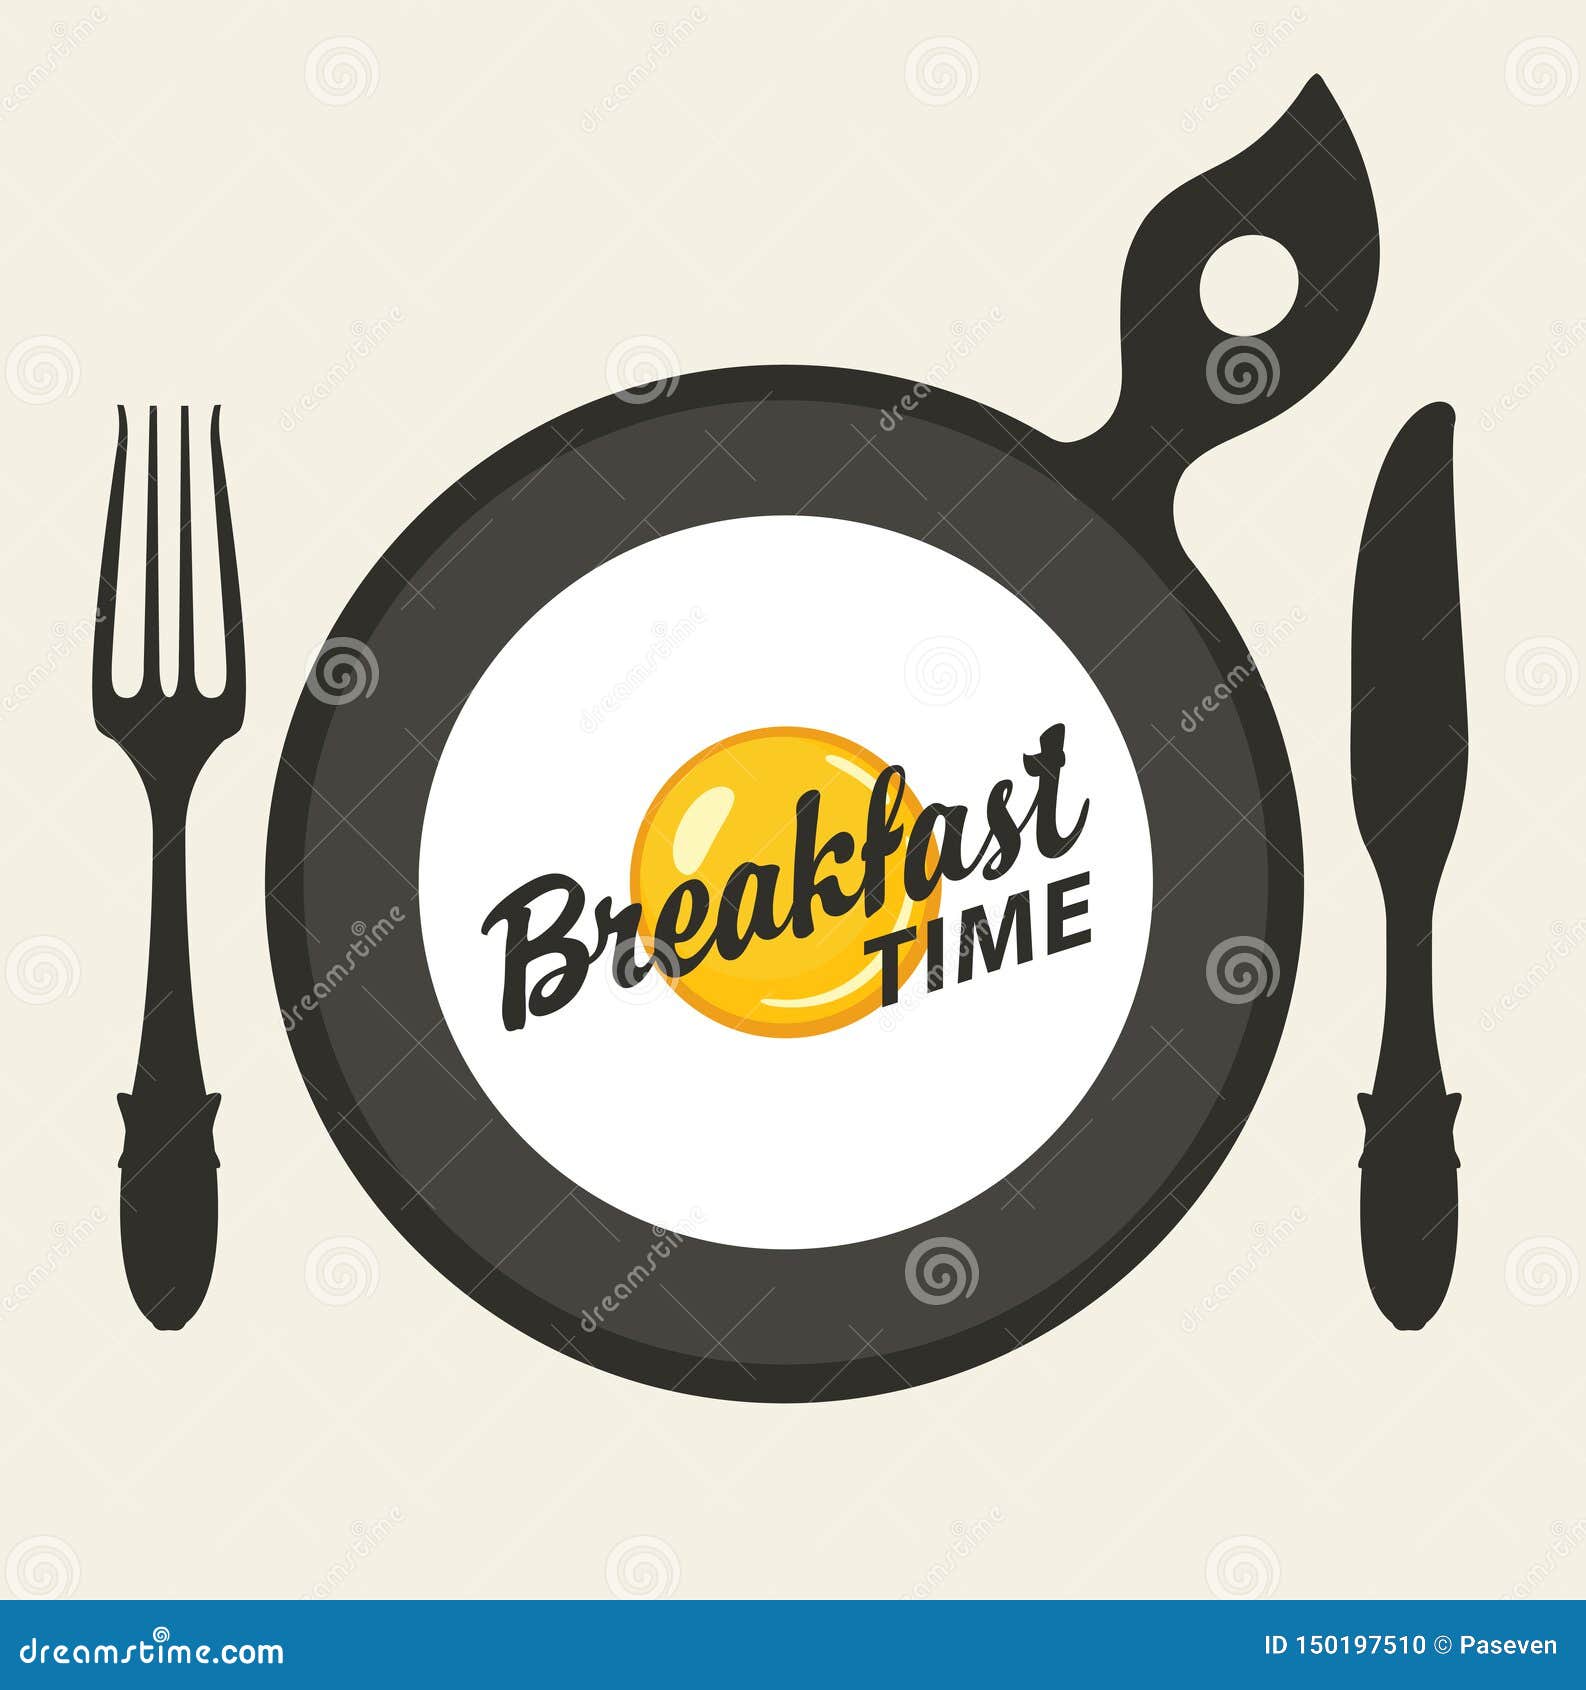 Breakfast Banner  With Fried Egg Fork  And Knife Stock Vector 